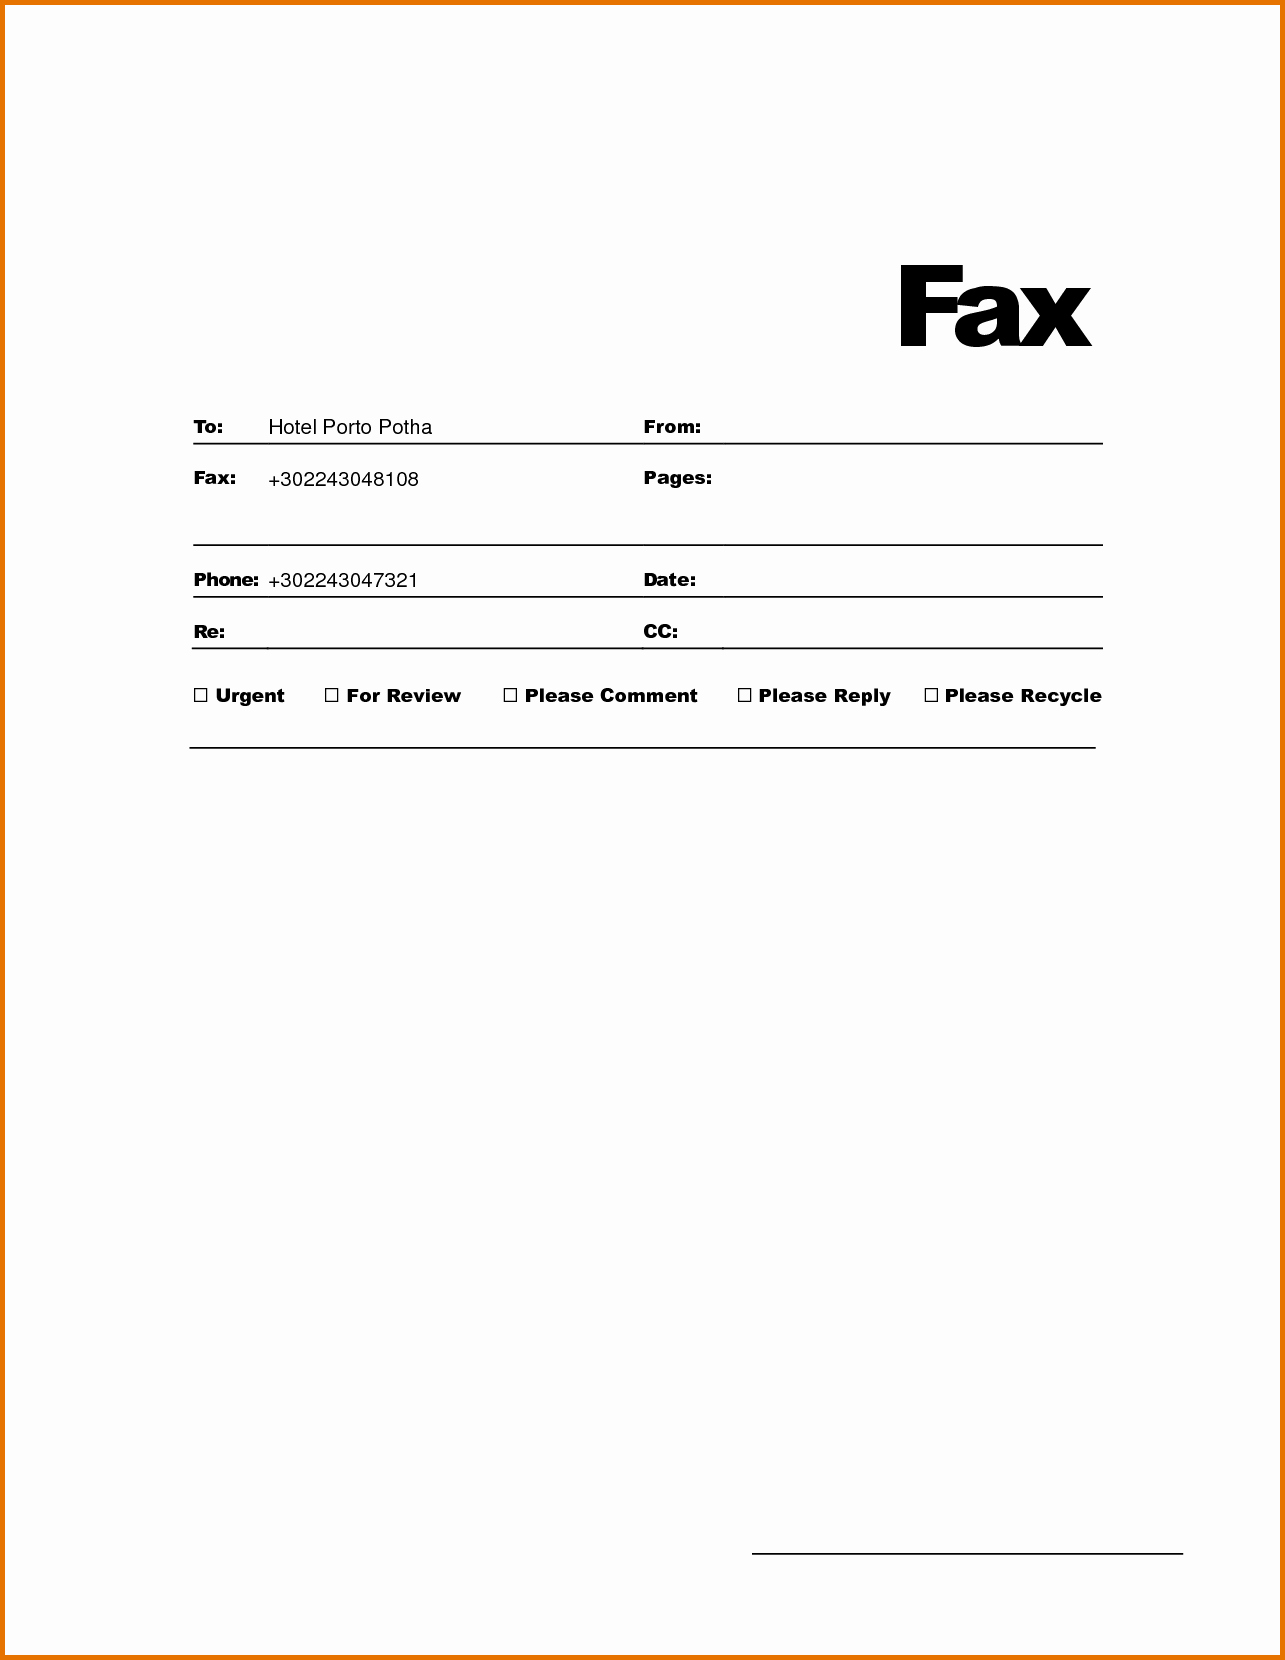 How to format A Fax Elegant Fax Cover Sheet Template for Wordreference Letters Words